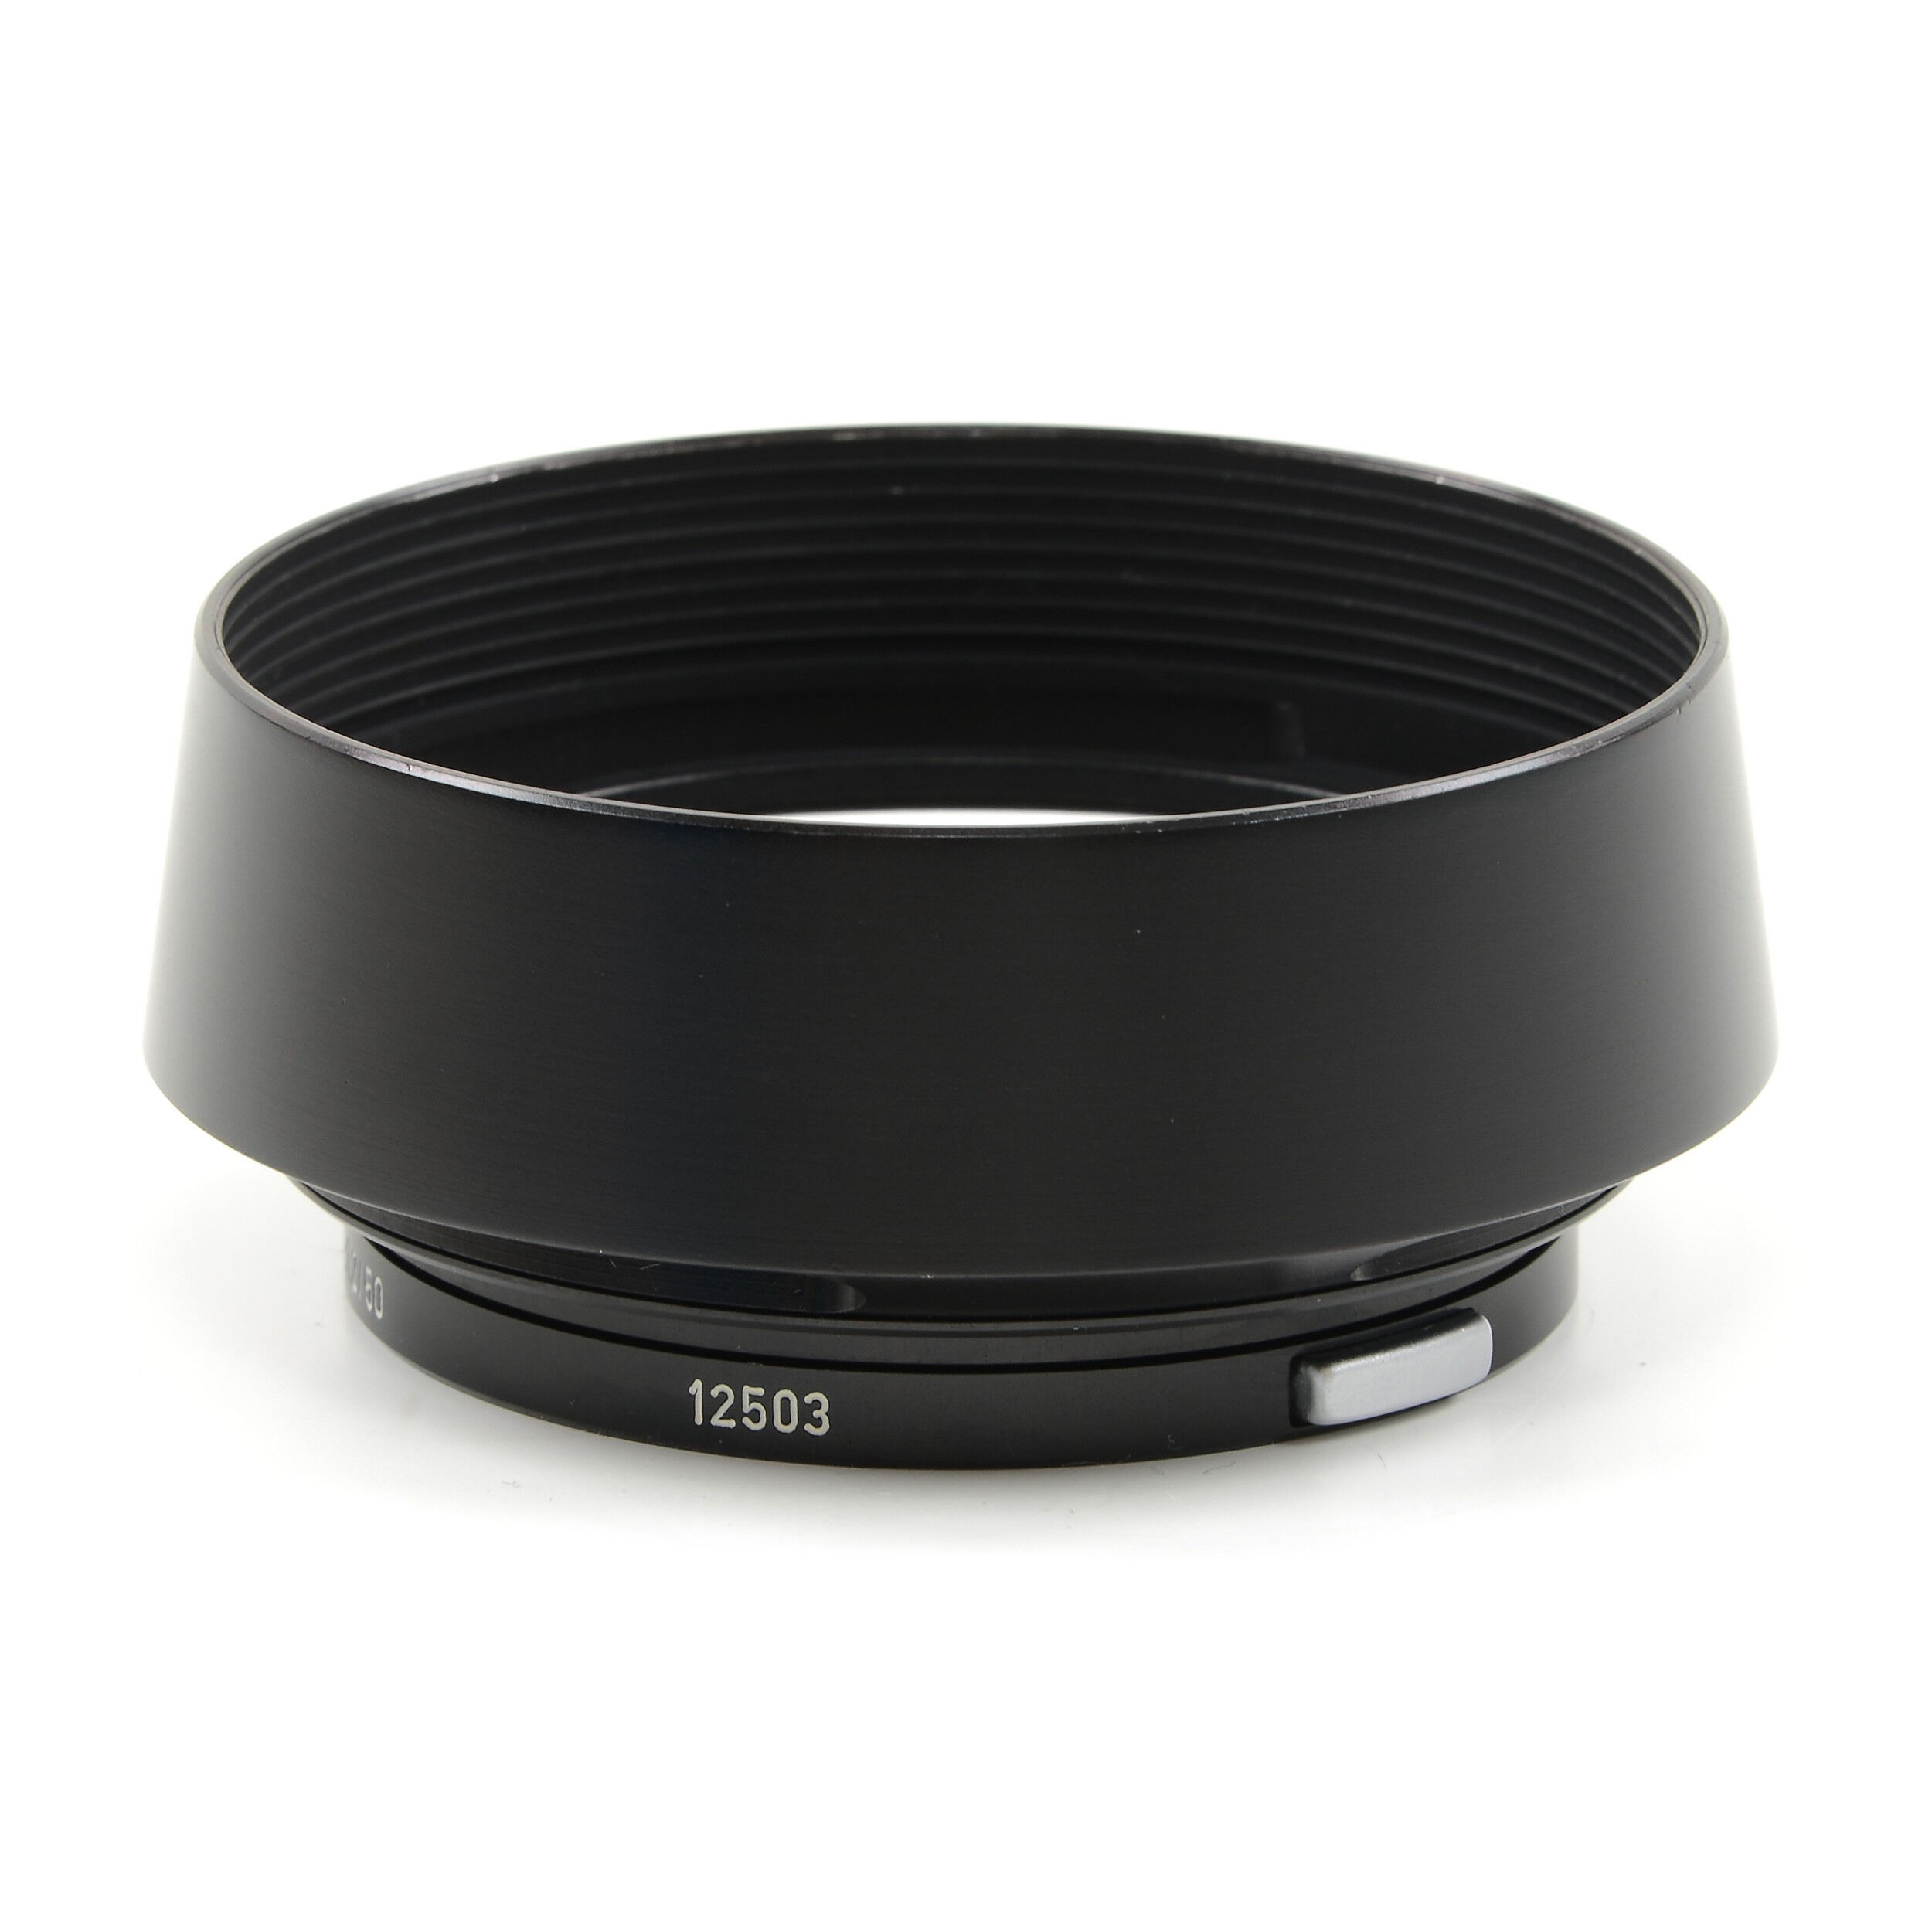 LEITZ 12503 LENS HOOD FOR NOCTILUX 50MM F1.2 VERY RARE 12503 #4438